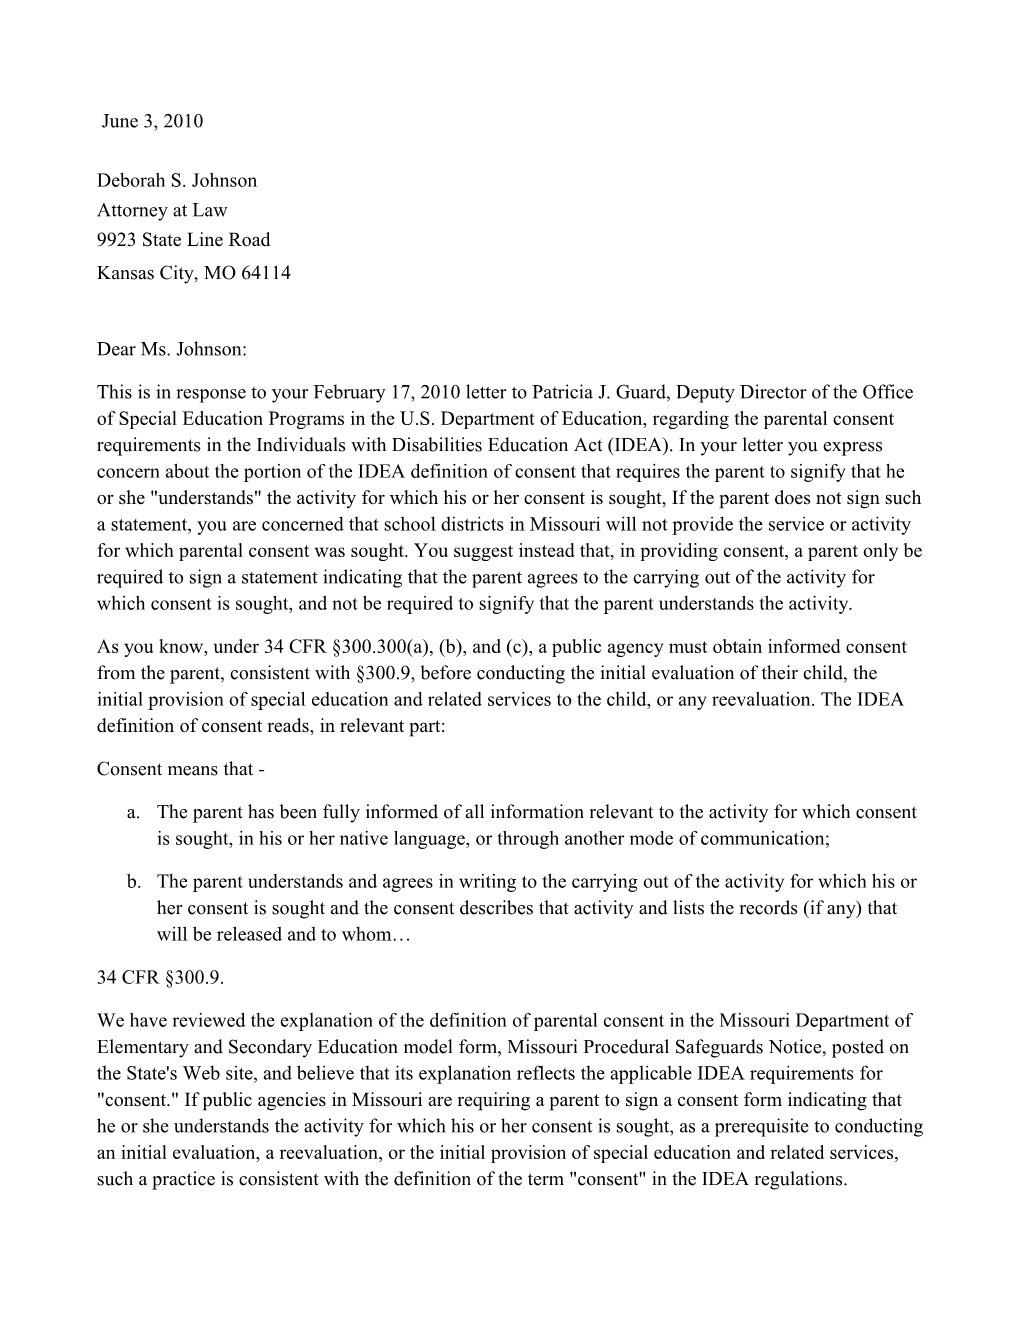 Johnson Letter Dated 06/03/10 Re: Evaluations, Parental Consent, and Reevaluations (MS Word)